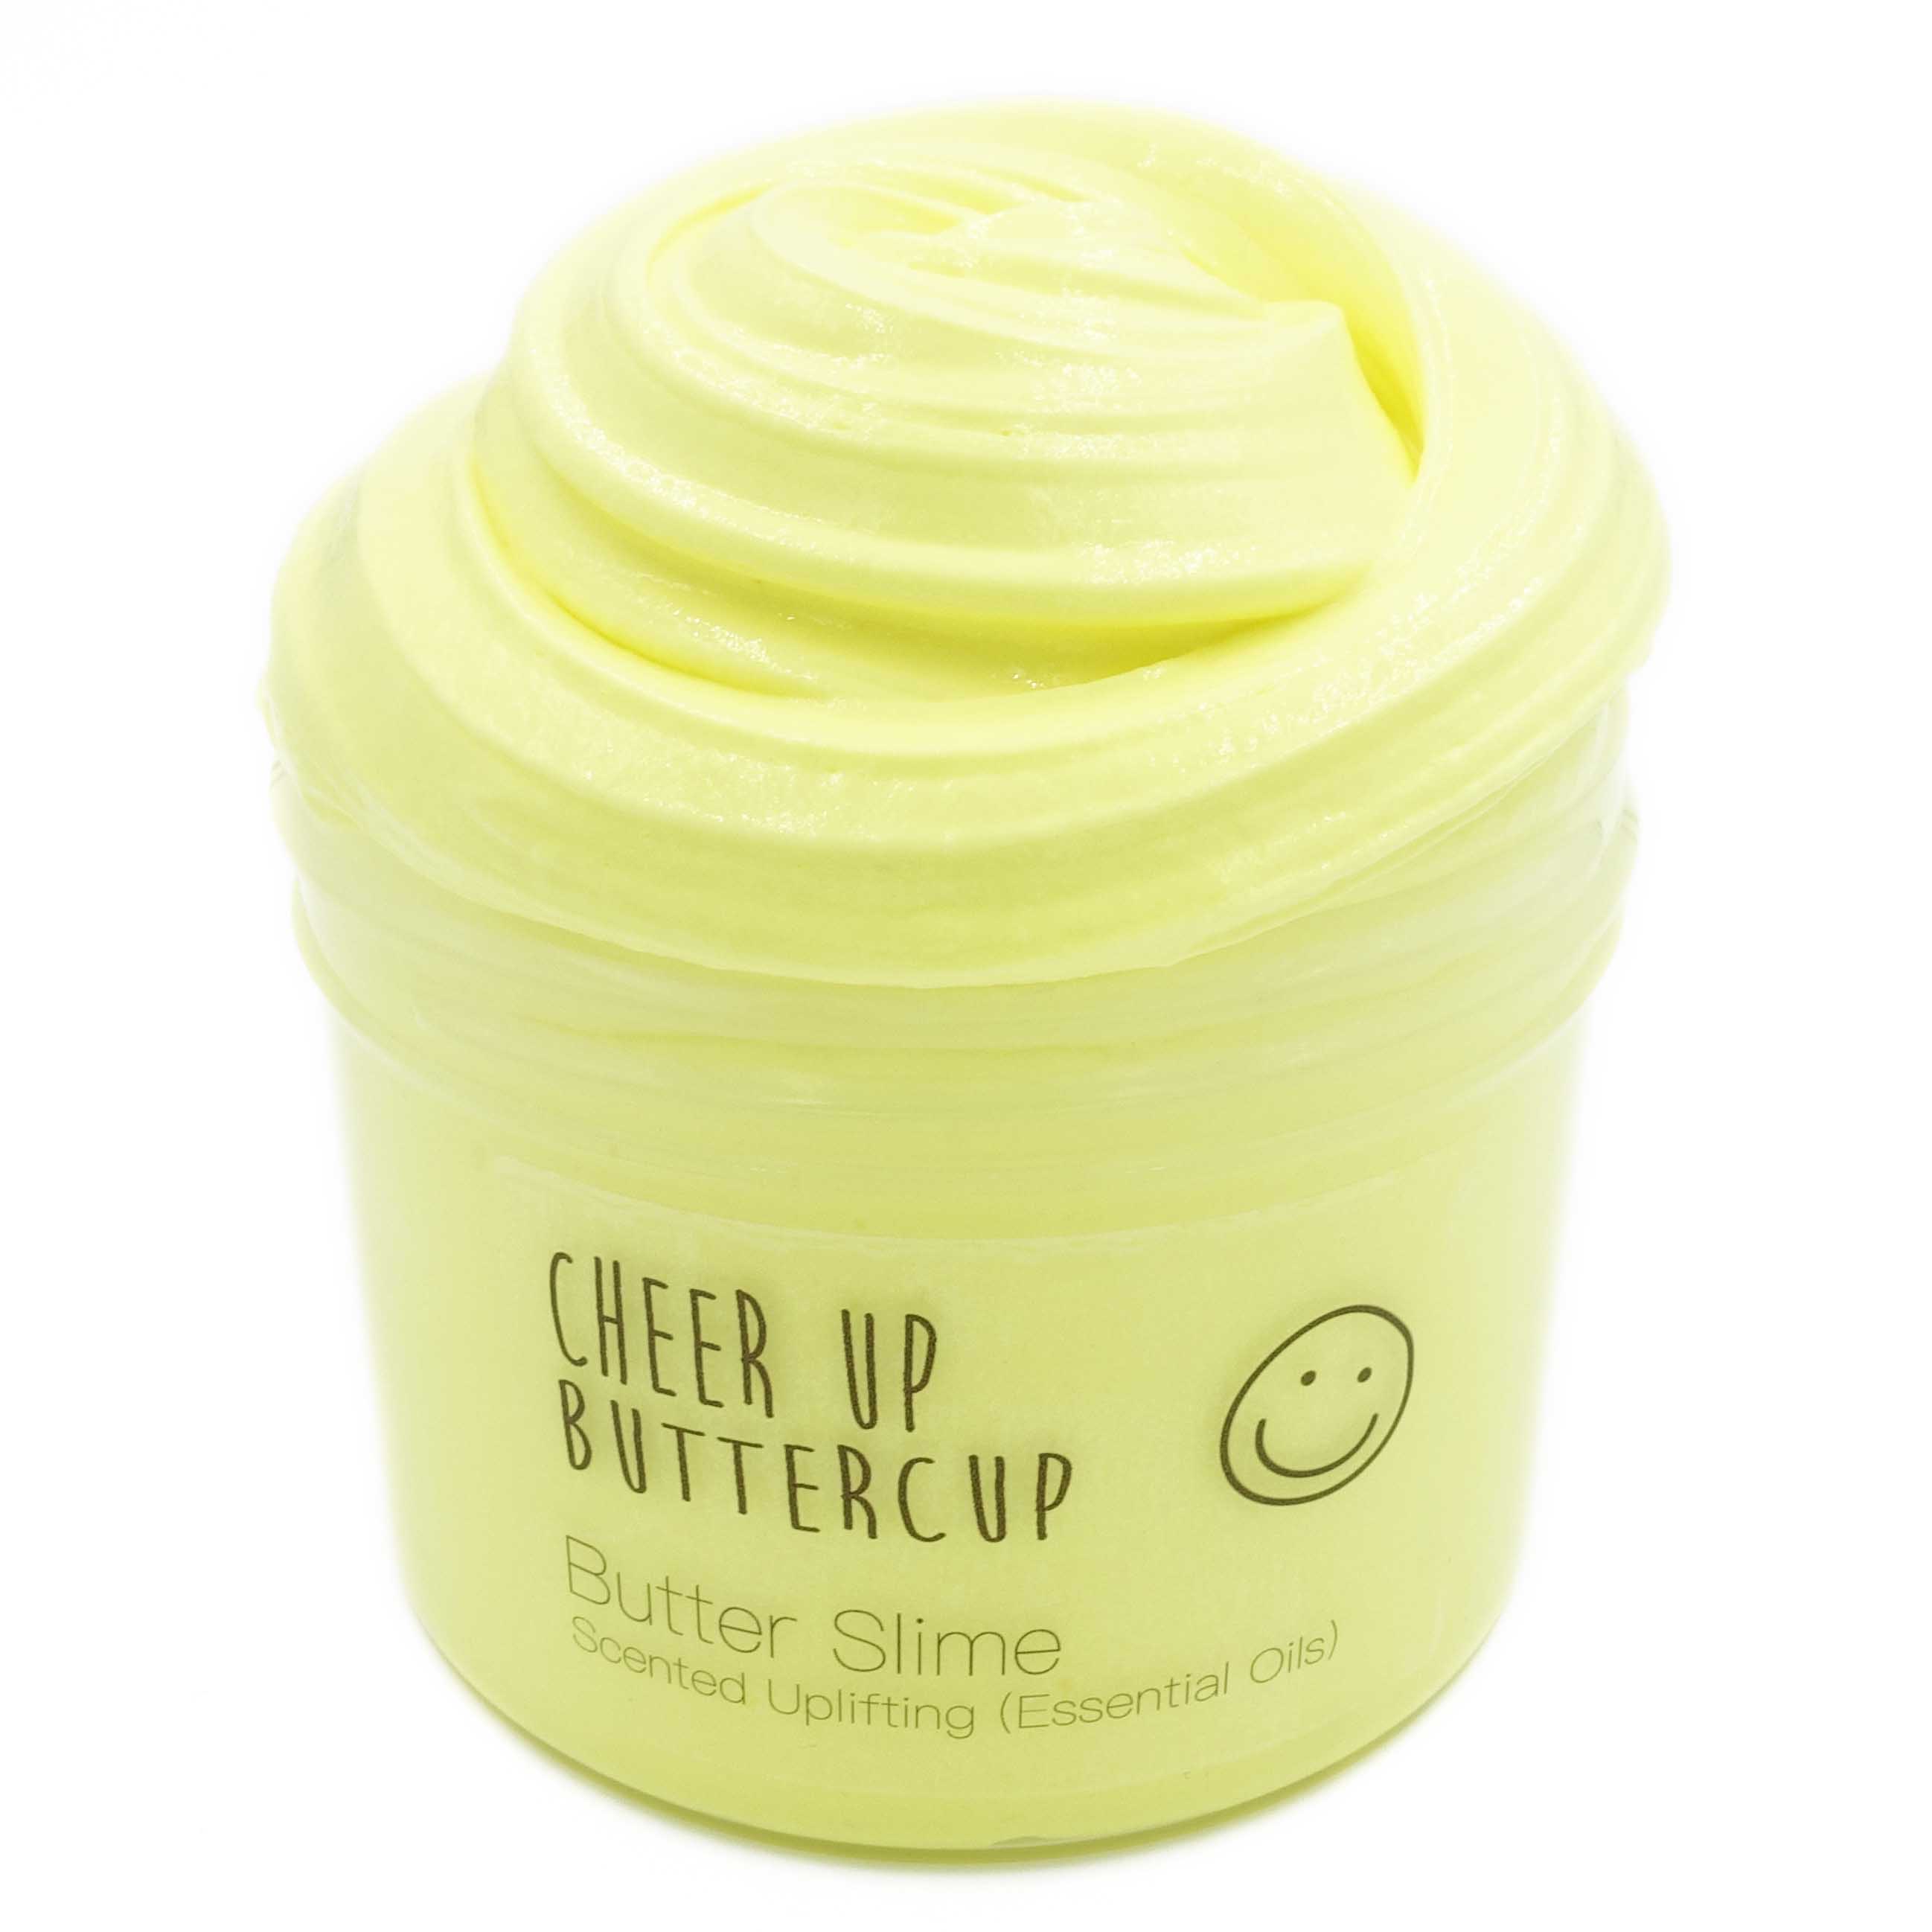 Cheer Up Buttercup Yellow Butter Slime 8oz Front View